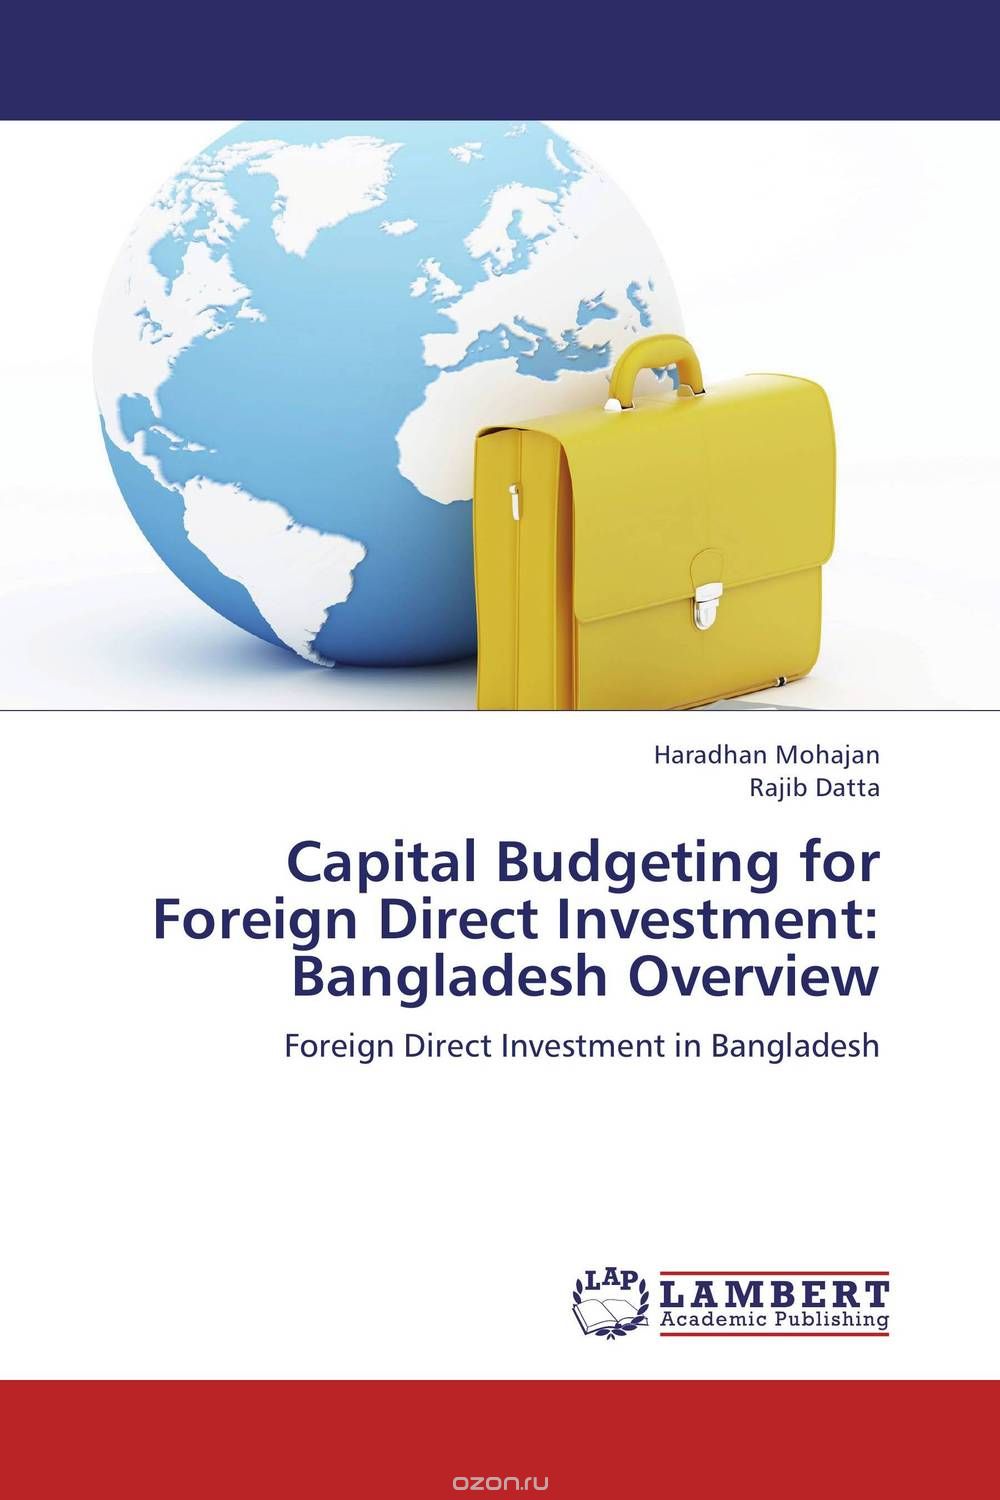 Capital Budgeting for Foreign Direct Investment: Bangladesh Overview